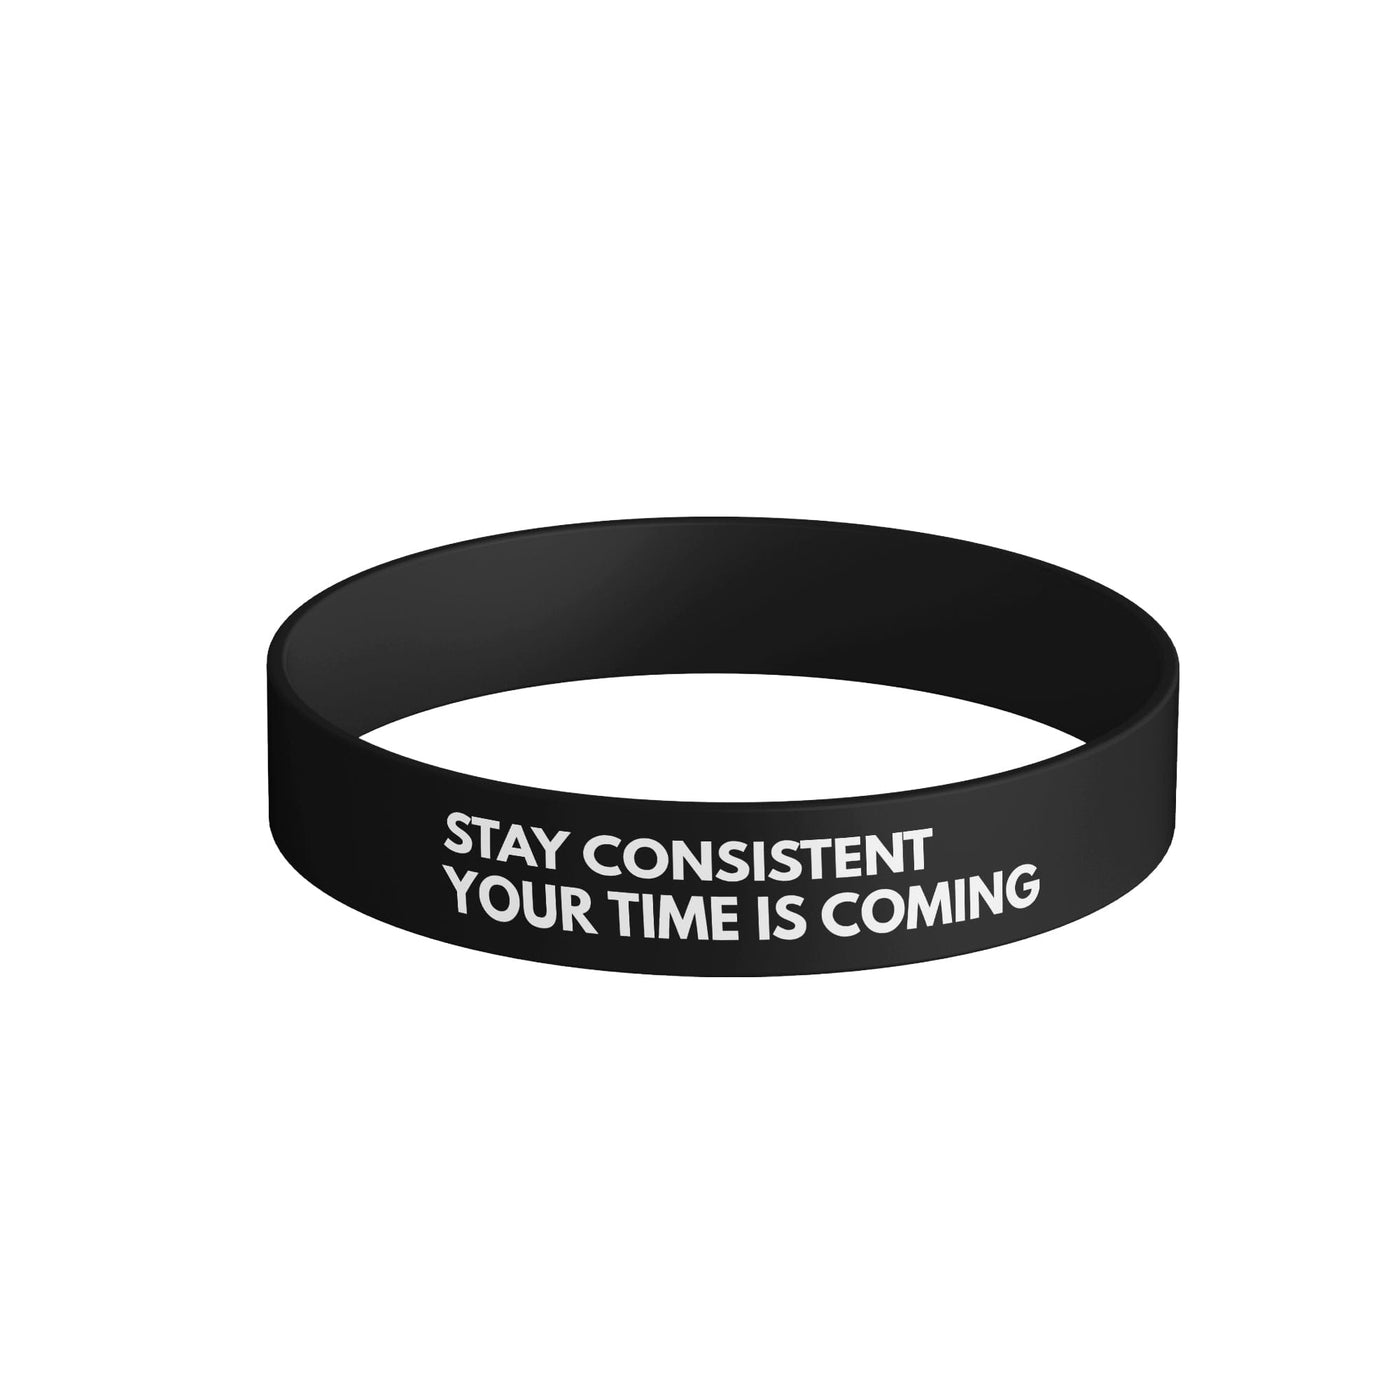 Stay Consistent Wristband - FKN Rich